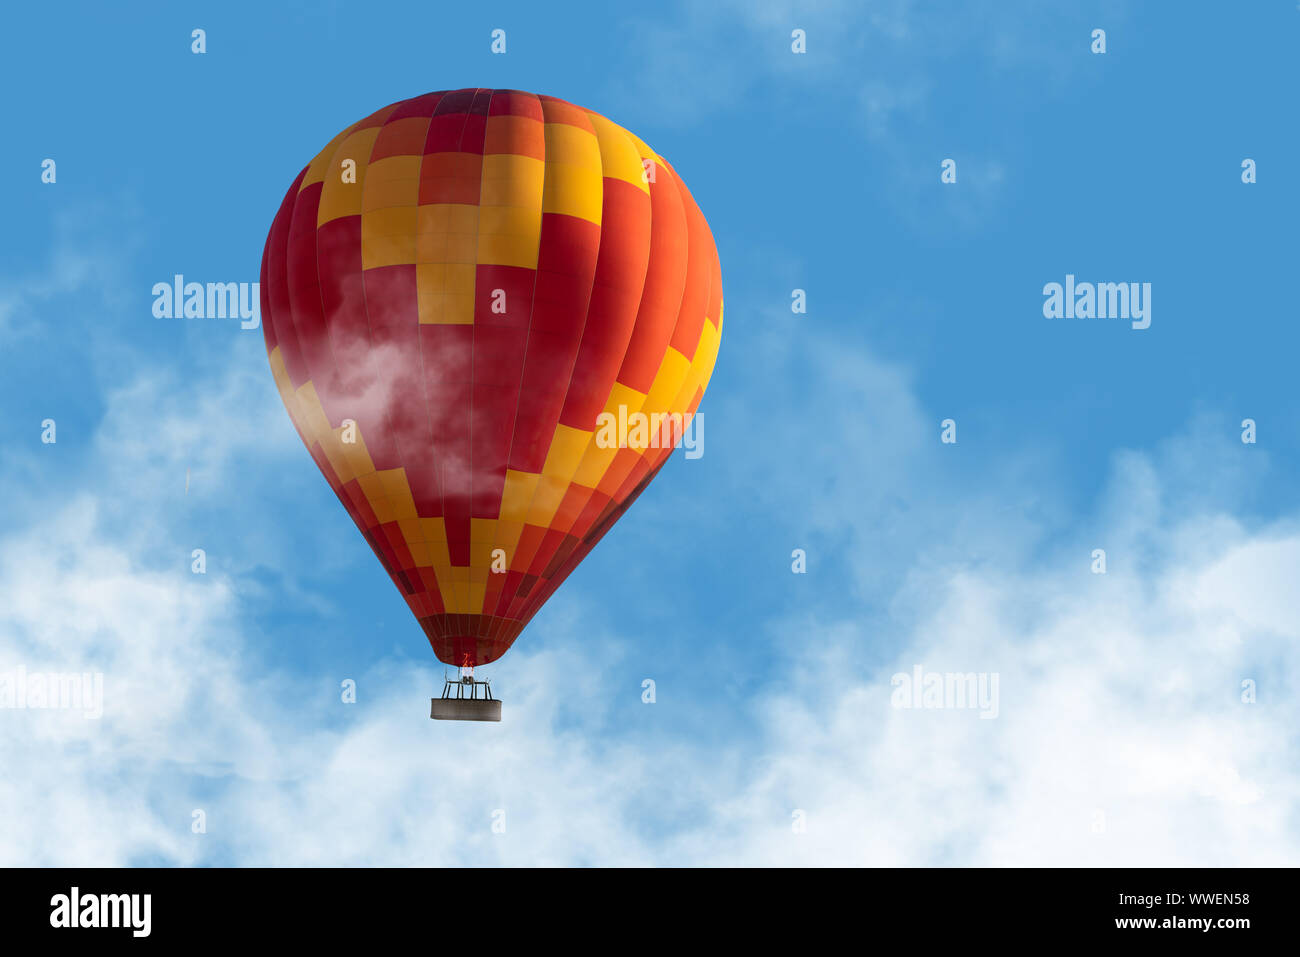 Hot air ballon floating through the clouds in blue sky Stock Photo